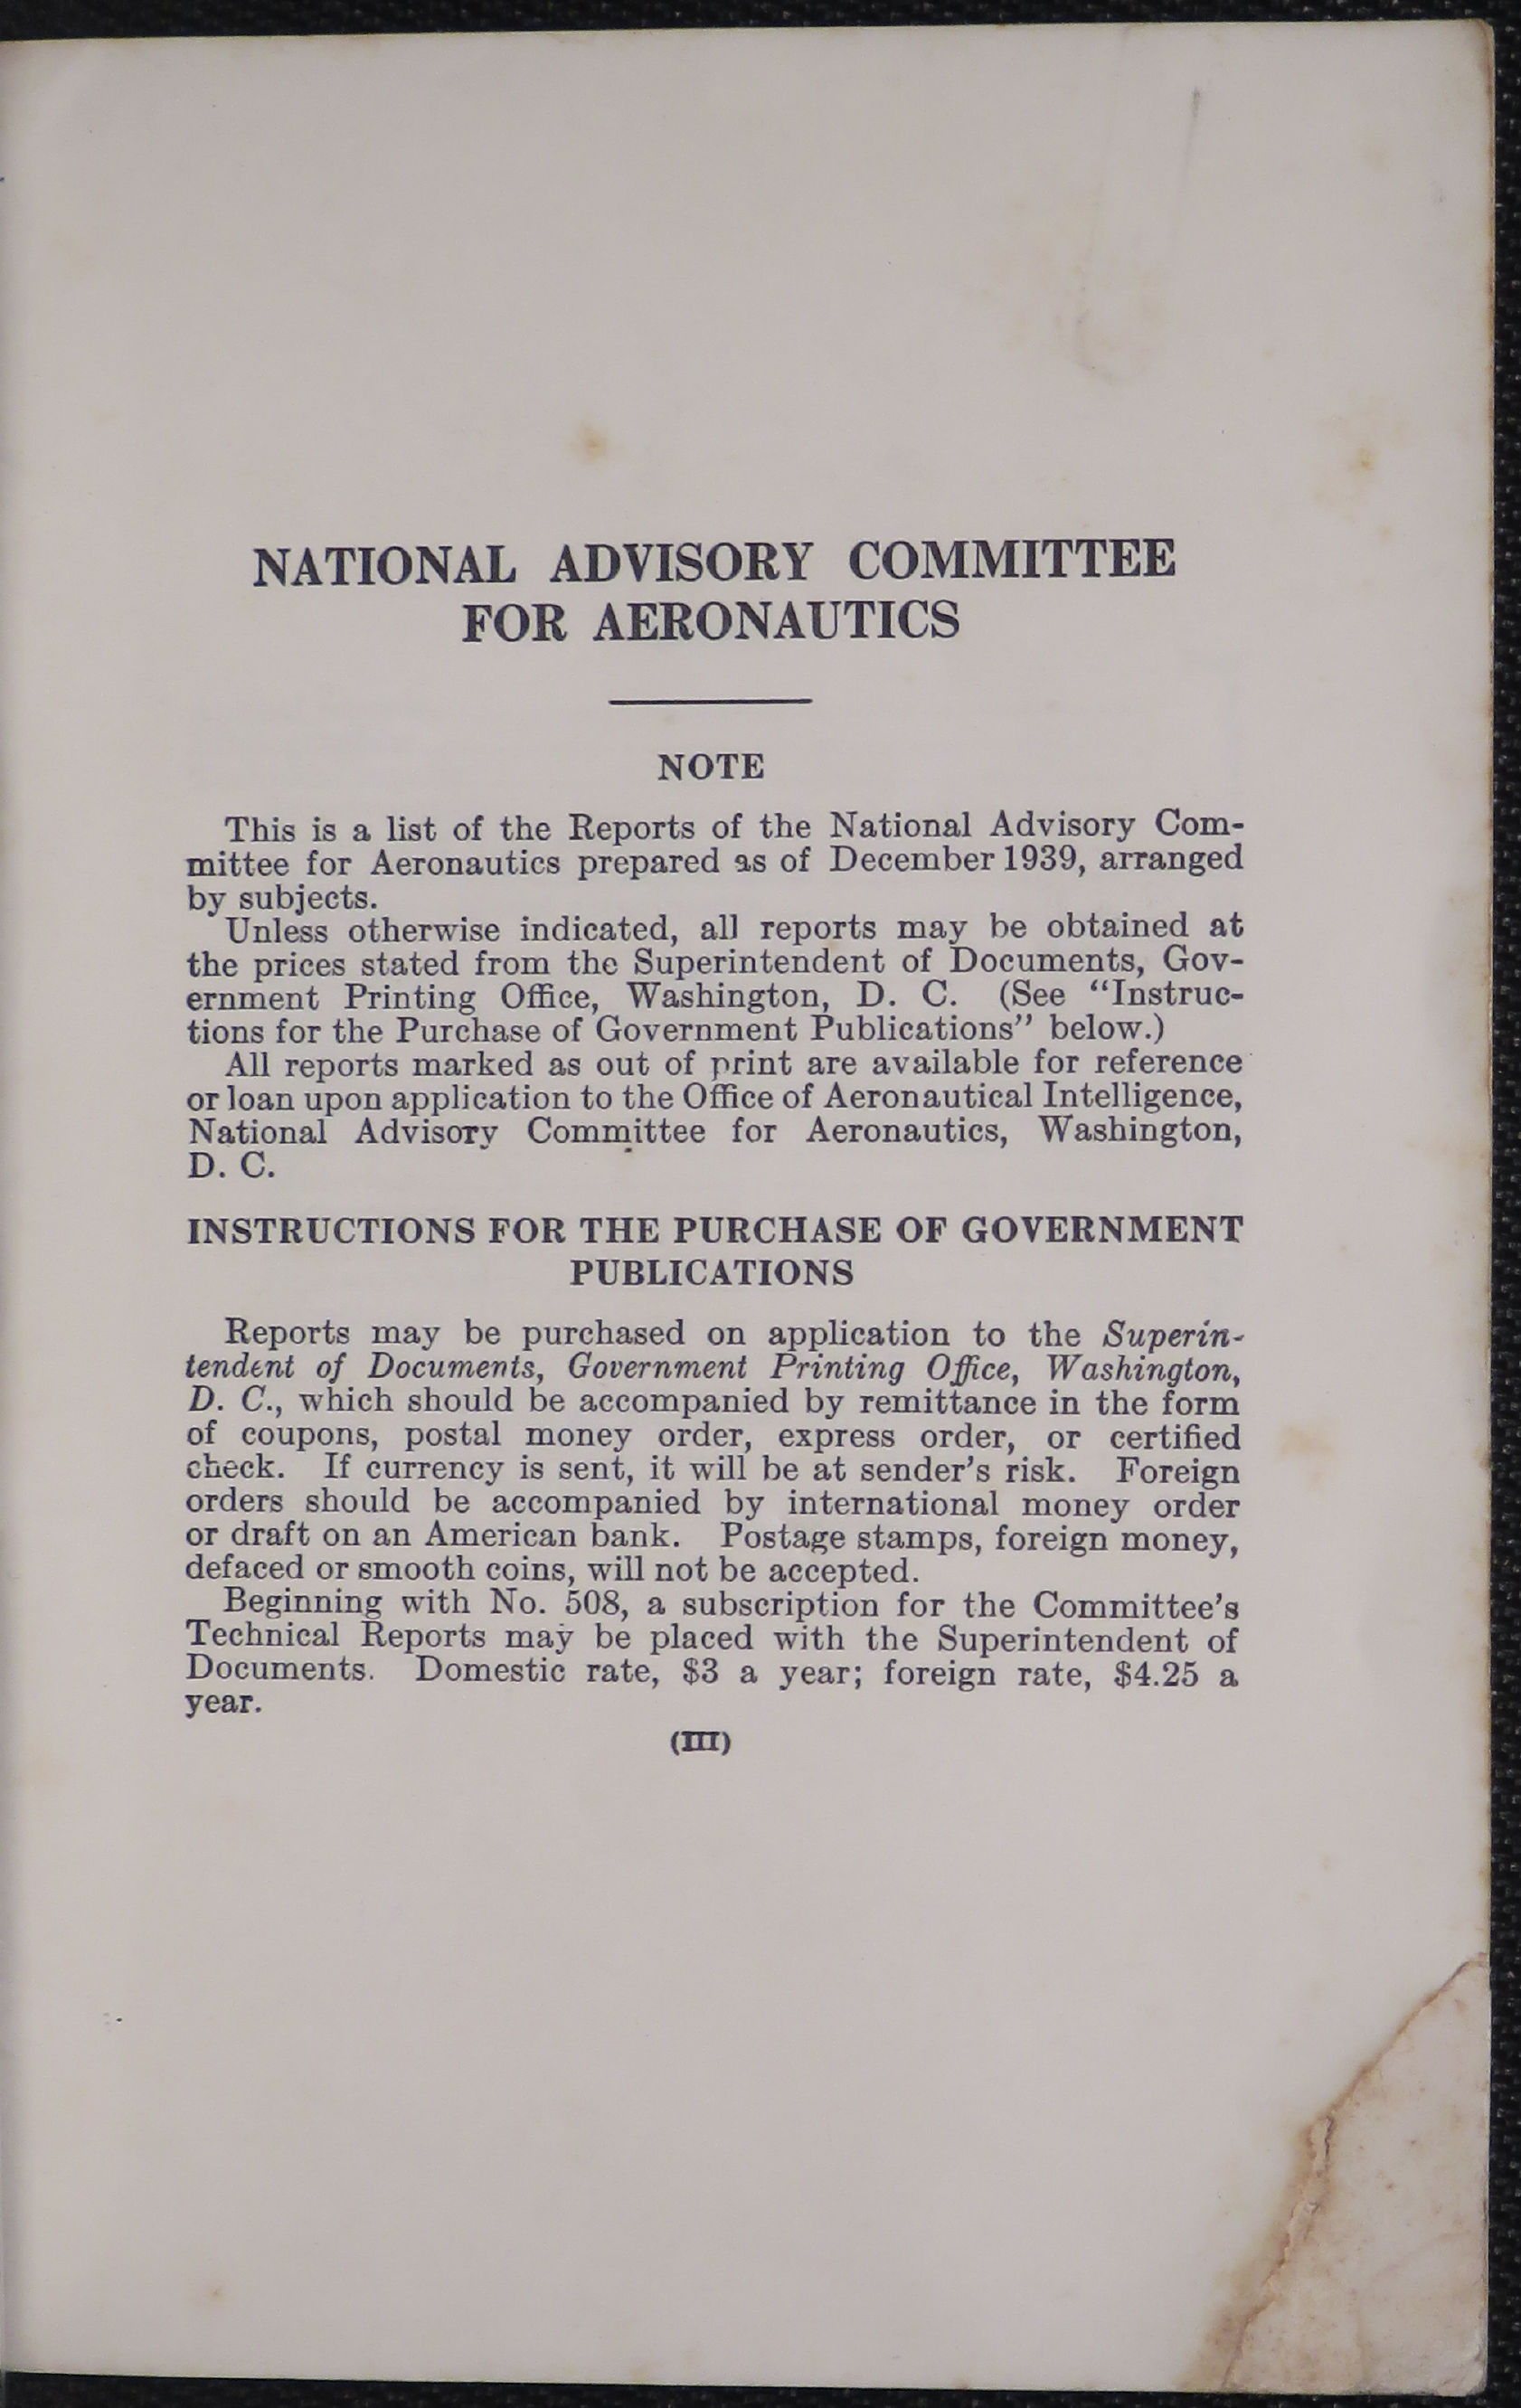 Sample page 5 from AirCorps Library document: National Advisory Committee for Aeronautics List of Reports with Prices